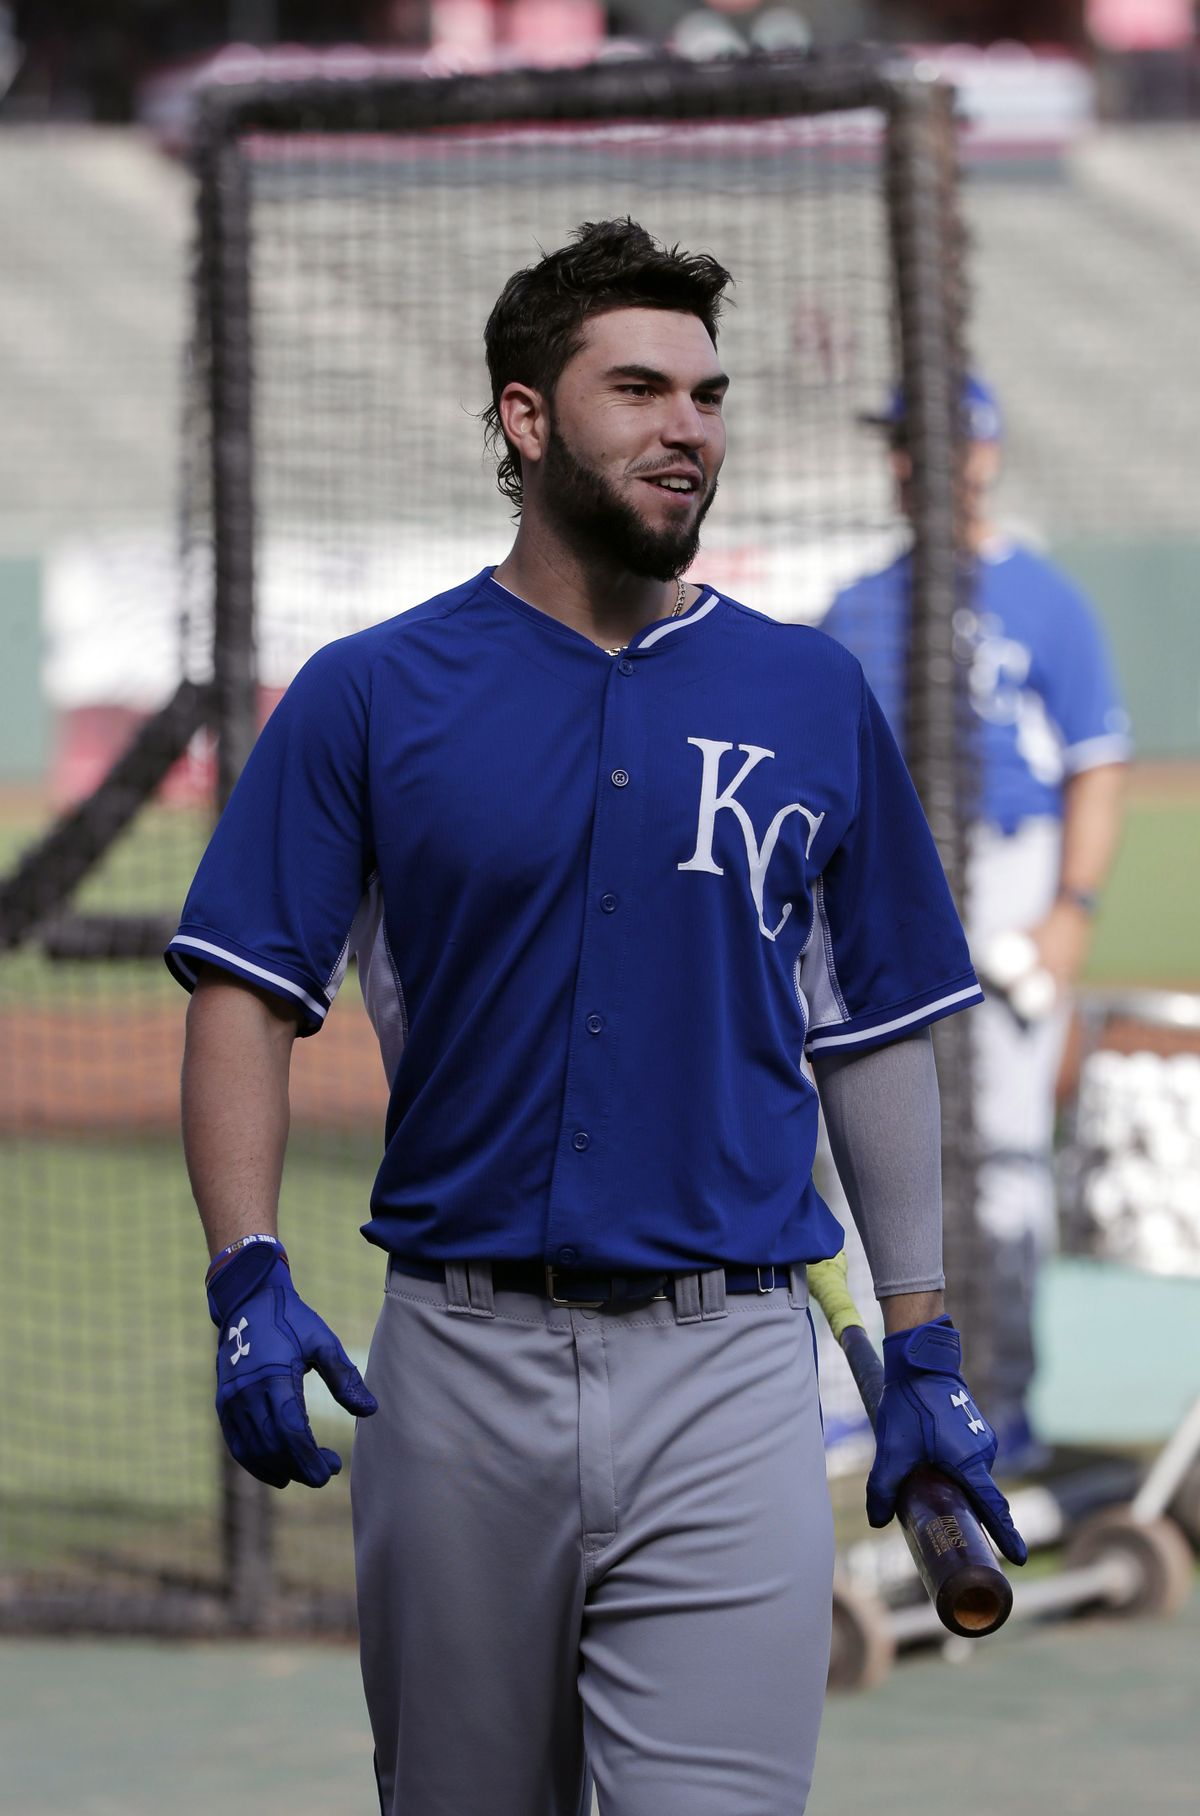 Royals first baseman Eric Hosmer came up short Thursday trying to reach McCovey Cove. (Associated Press)